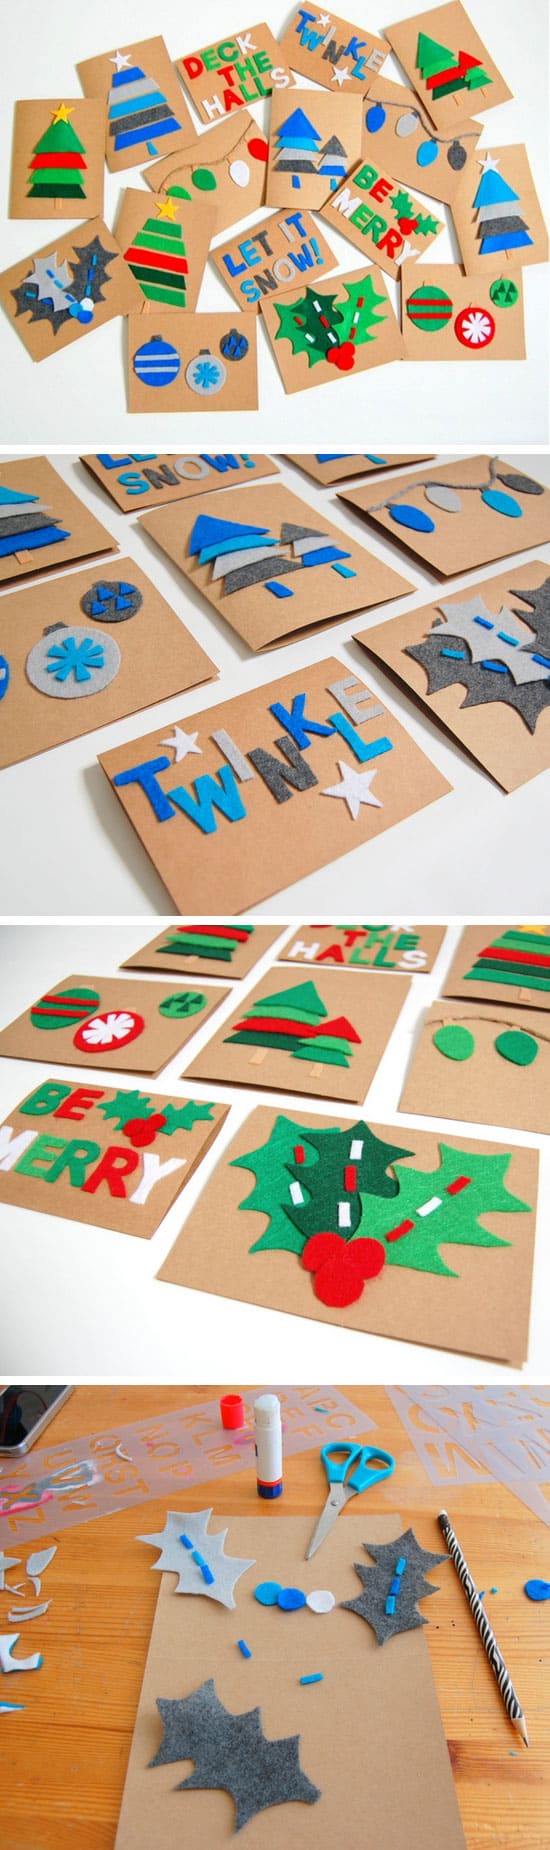 Make Your Own Creative Christmas Cards This Winter-homestheitcs.net (13)